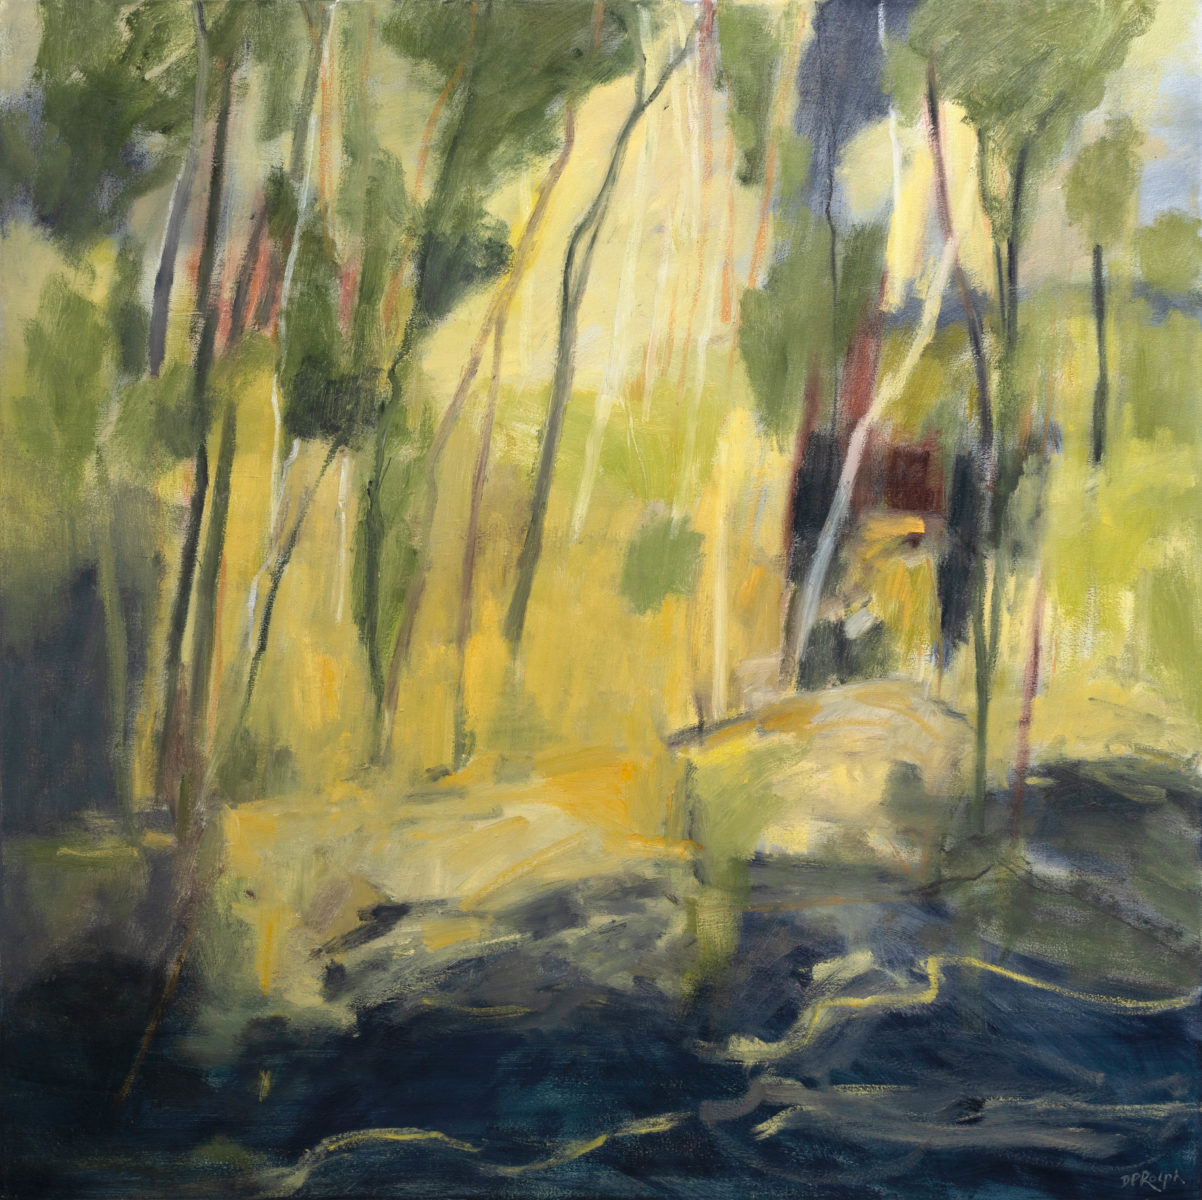 Cliff Face, Wappa Falls 2020 | Des Rolph | oil on canvas | 120 x 120 cm | $6500